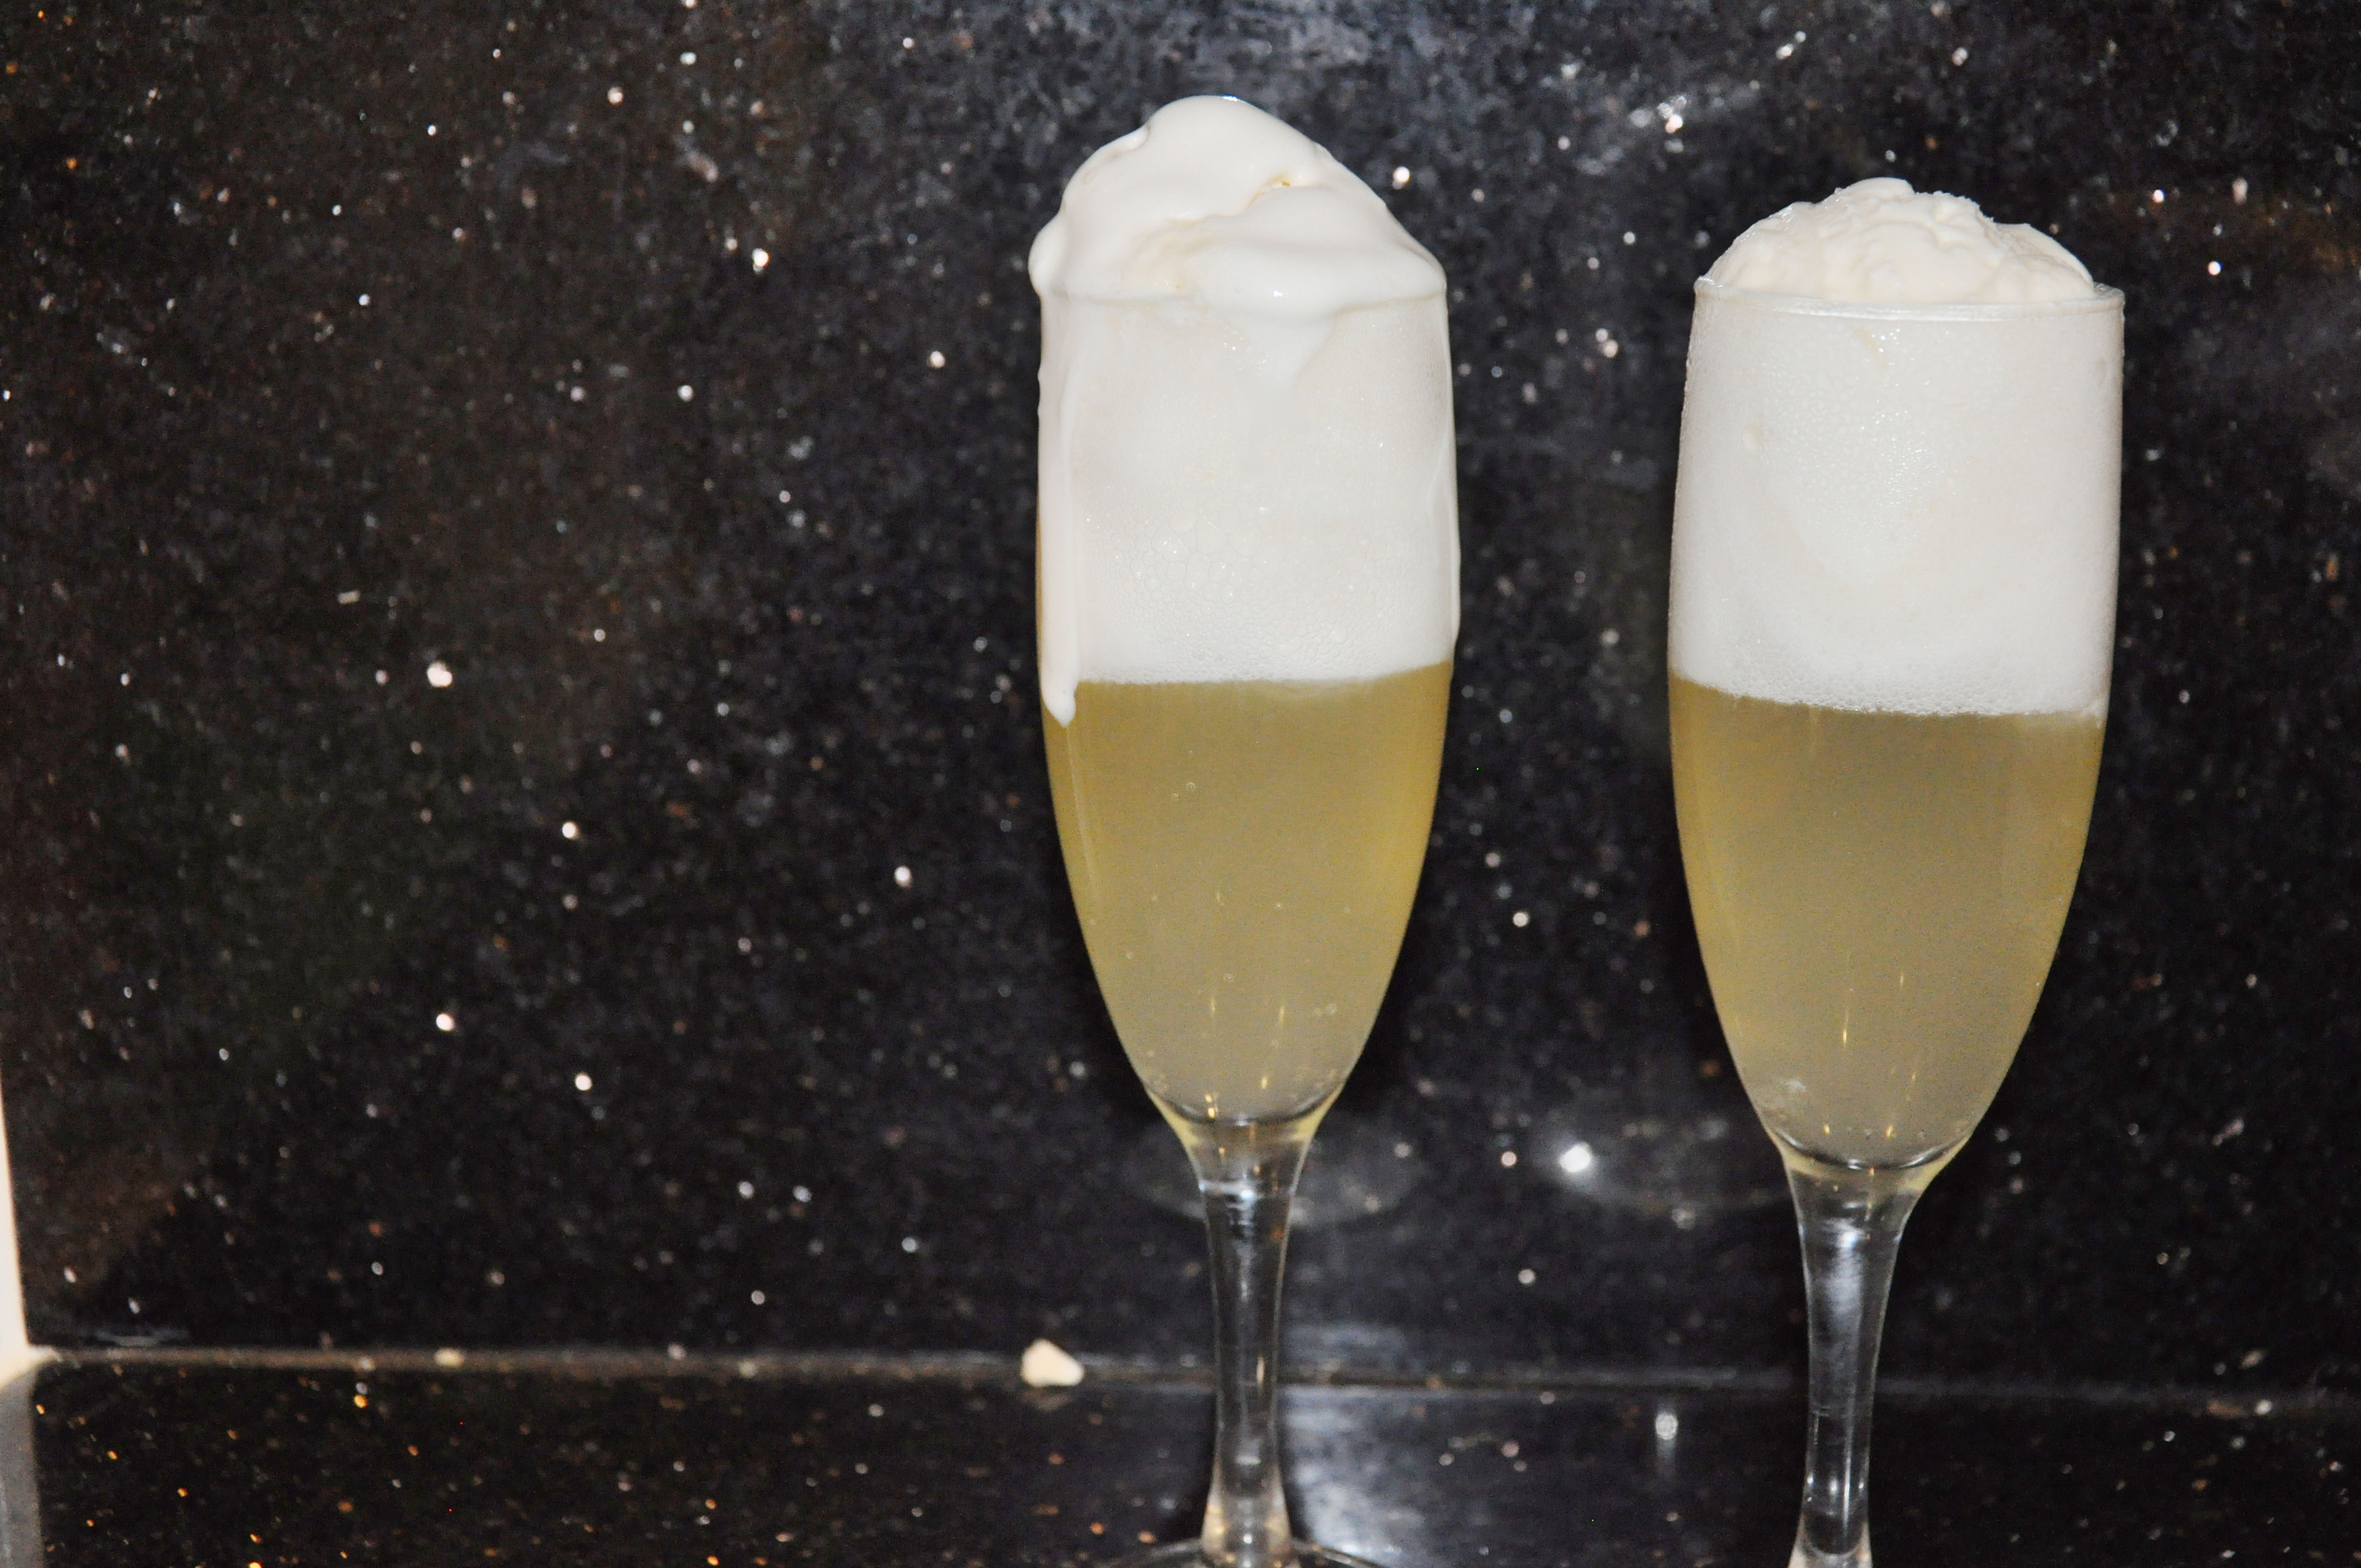 Celebrate with some sparkling concoctions this holiday season